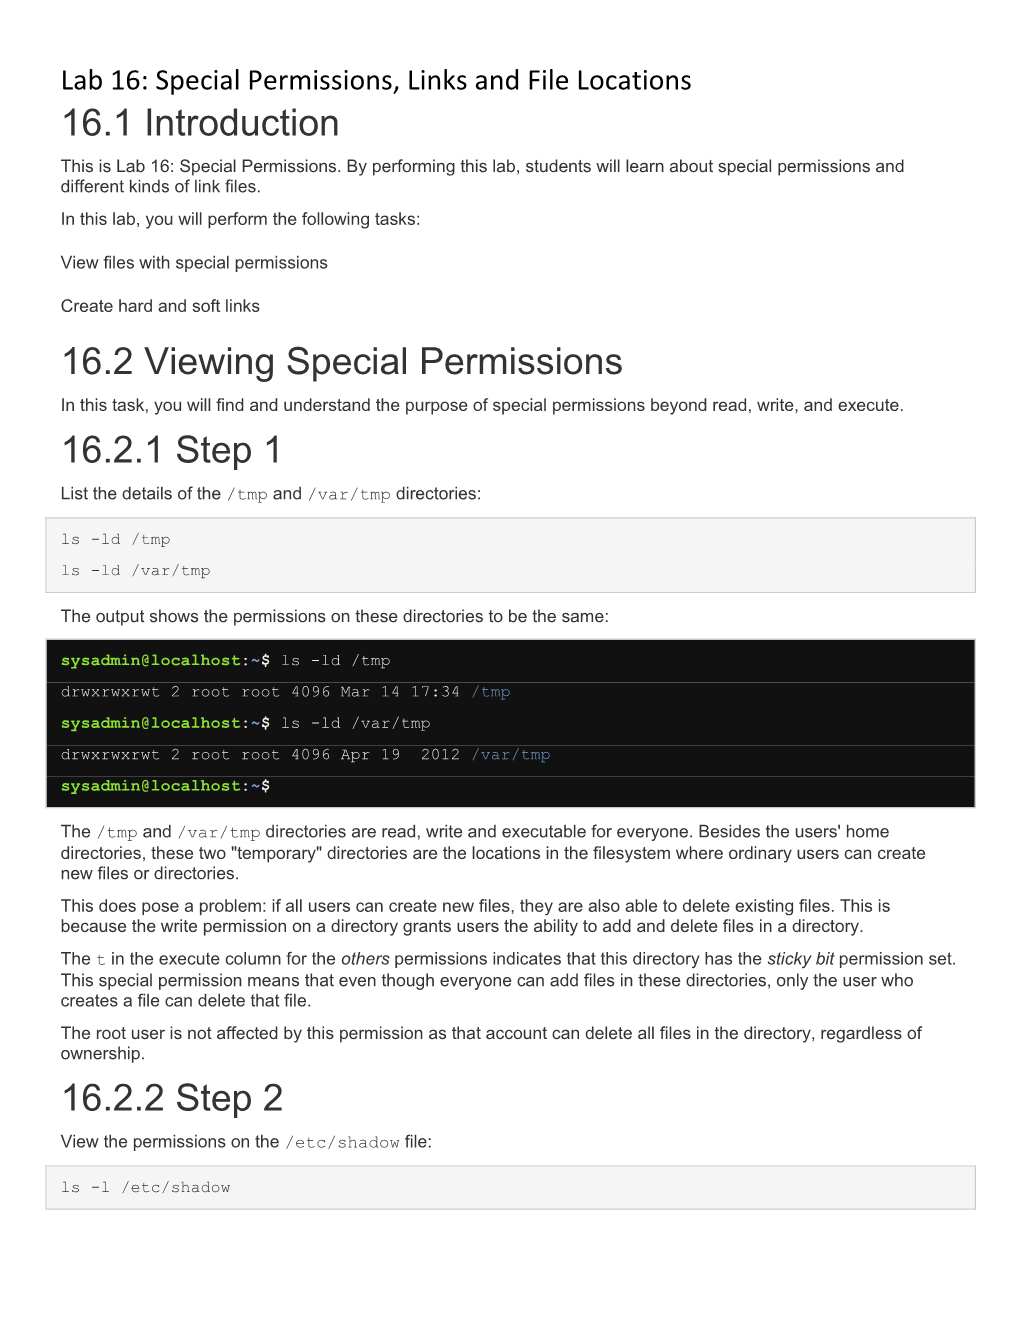 16.1 Introduction 16.2 Viewing Special Permissions 16.2.1 Step 1 16.2.2 Step 2